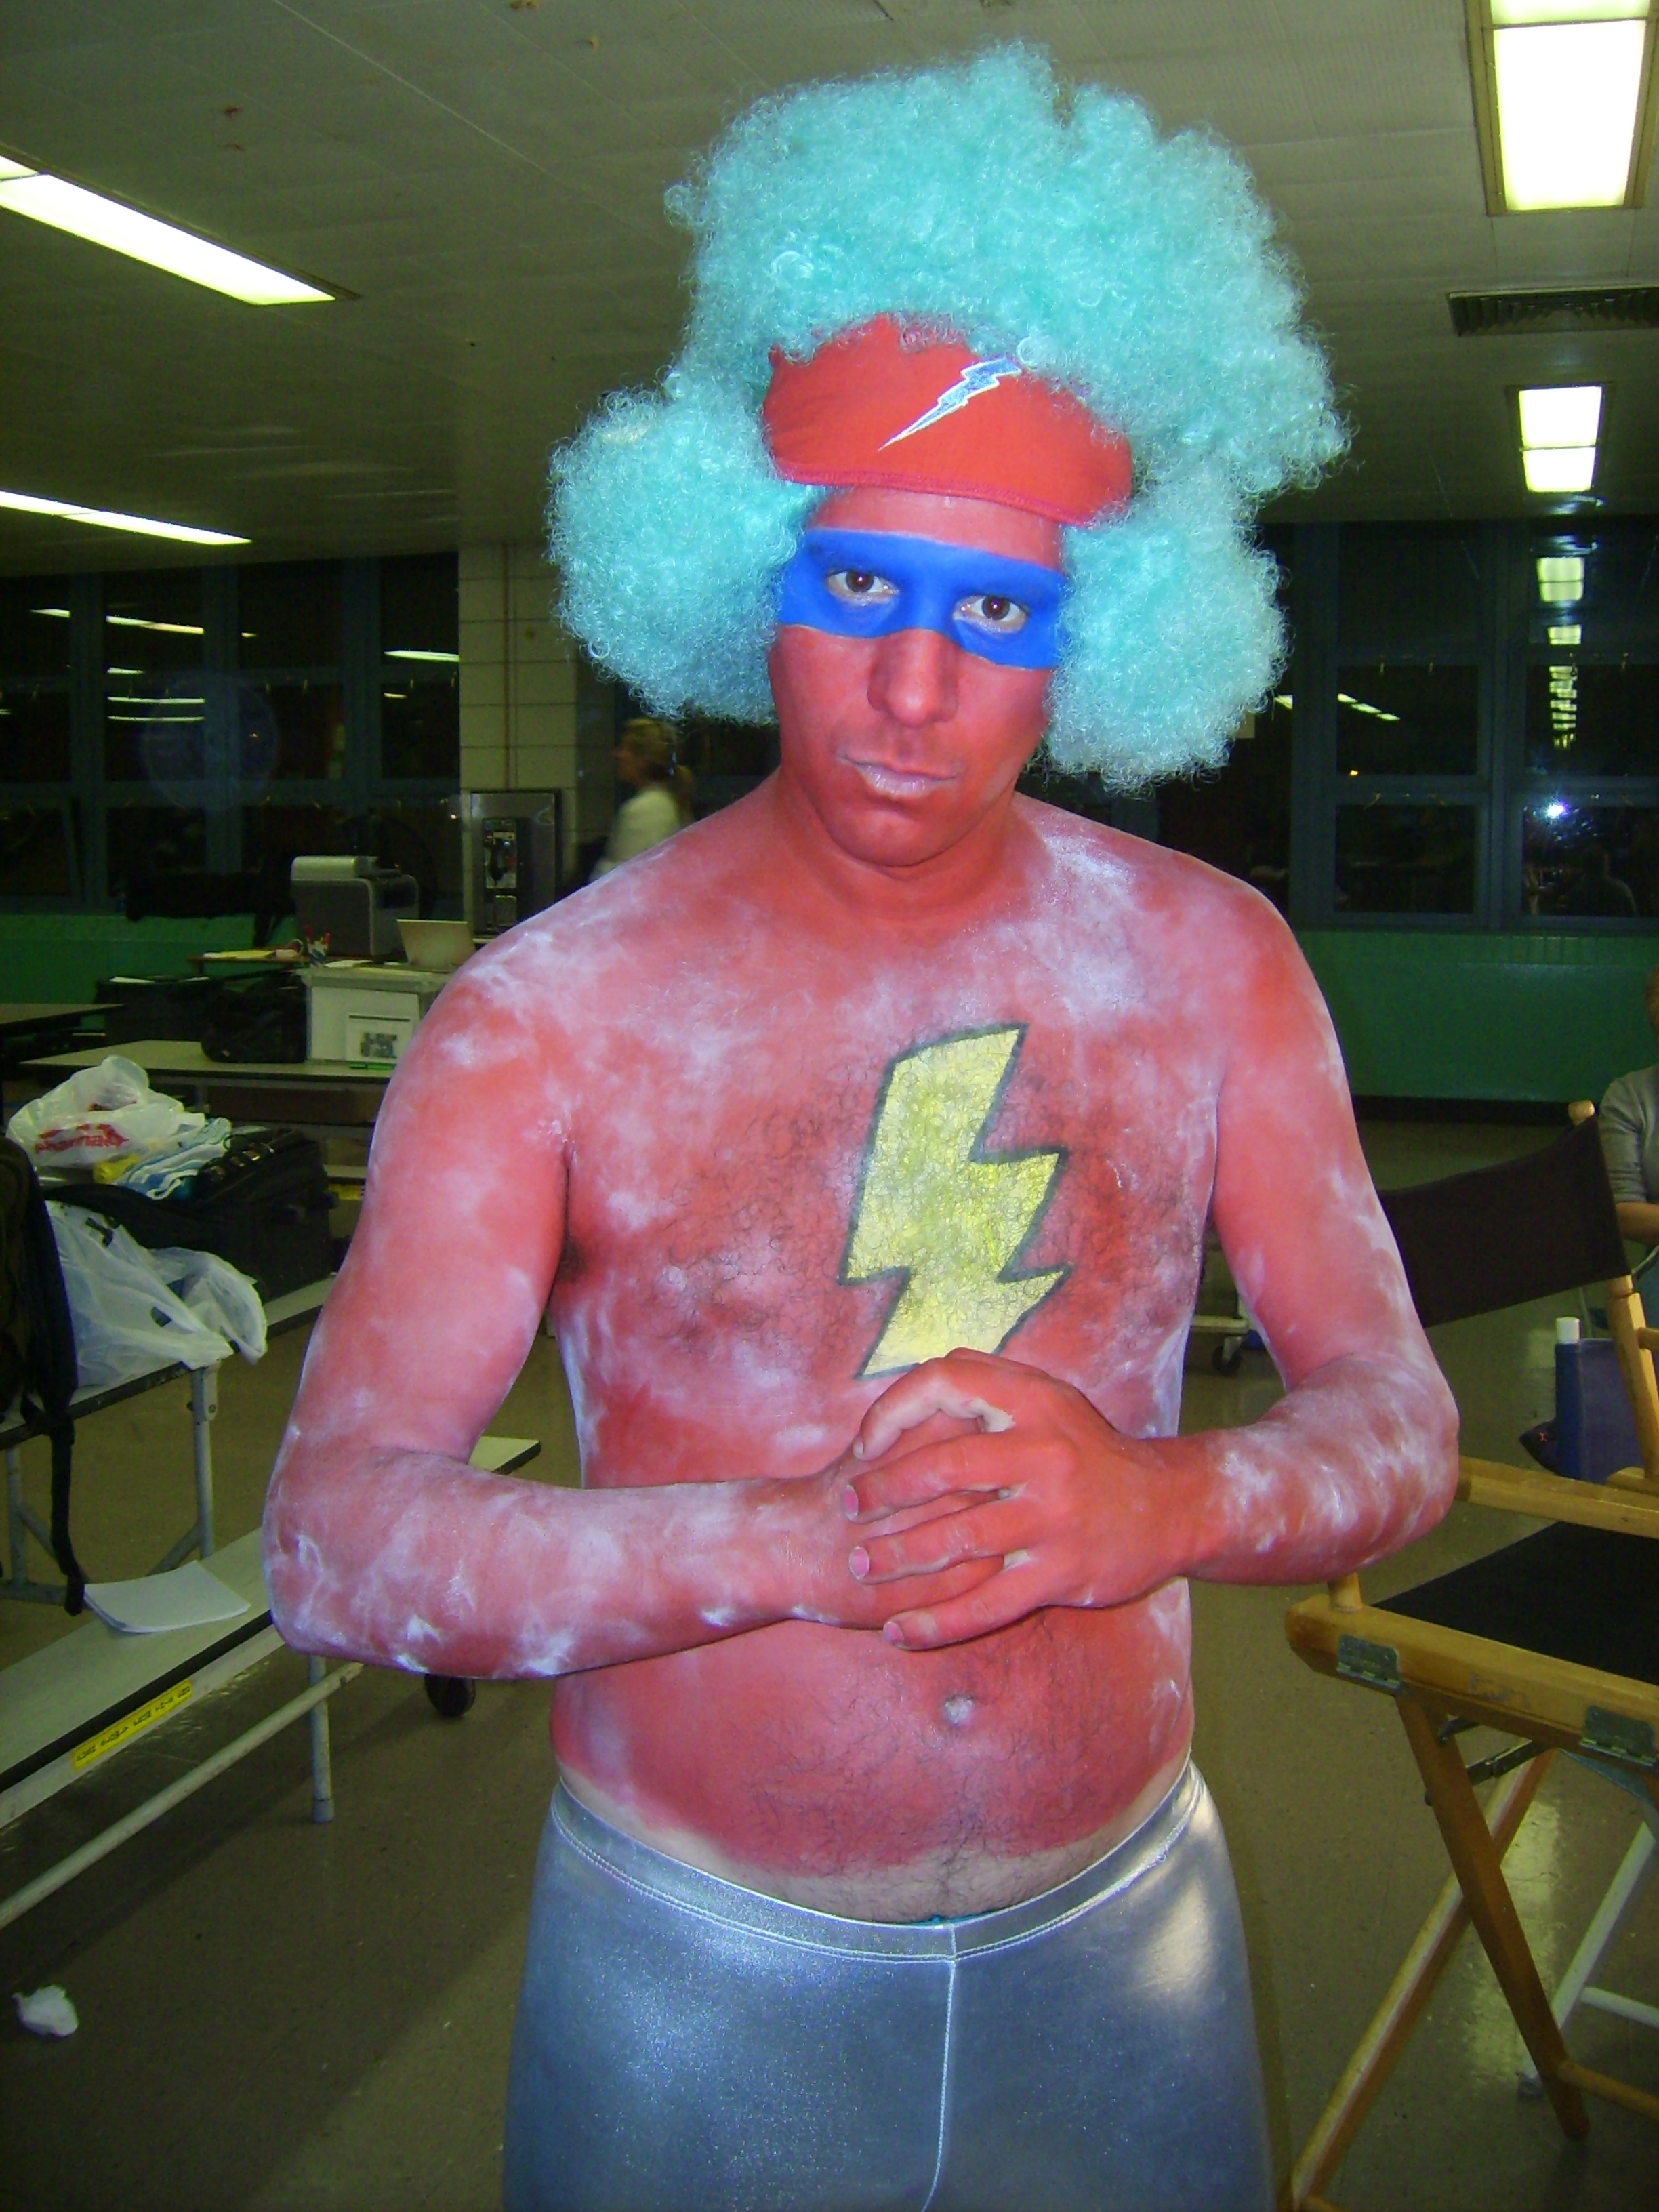 This is me as the Basketball Mascot just after makeup was done in 